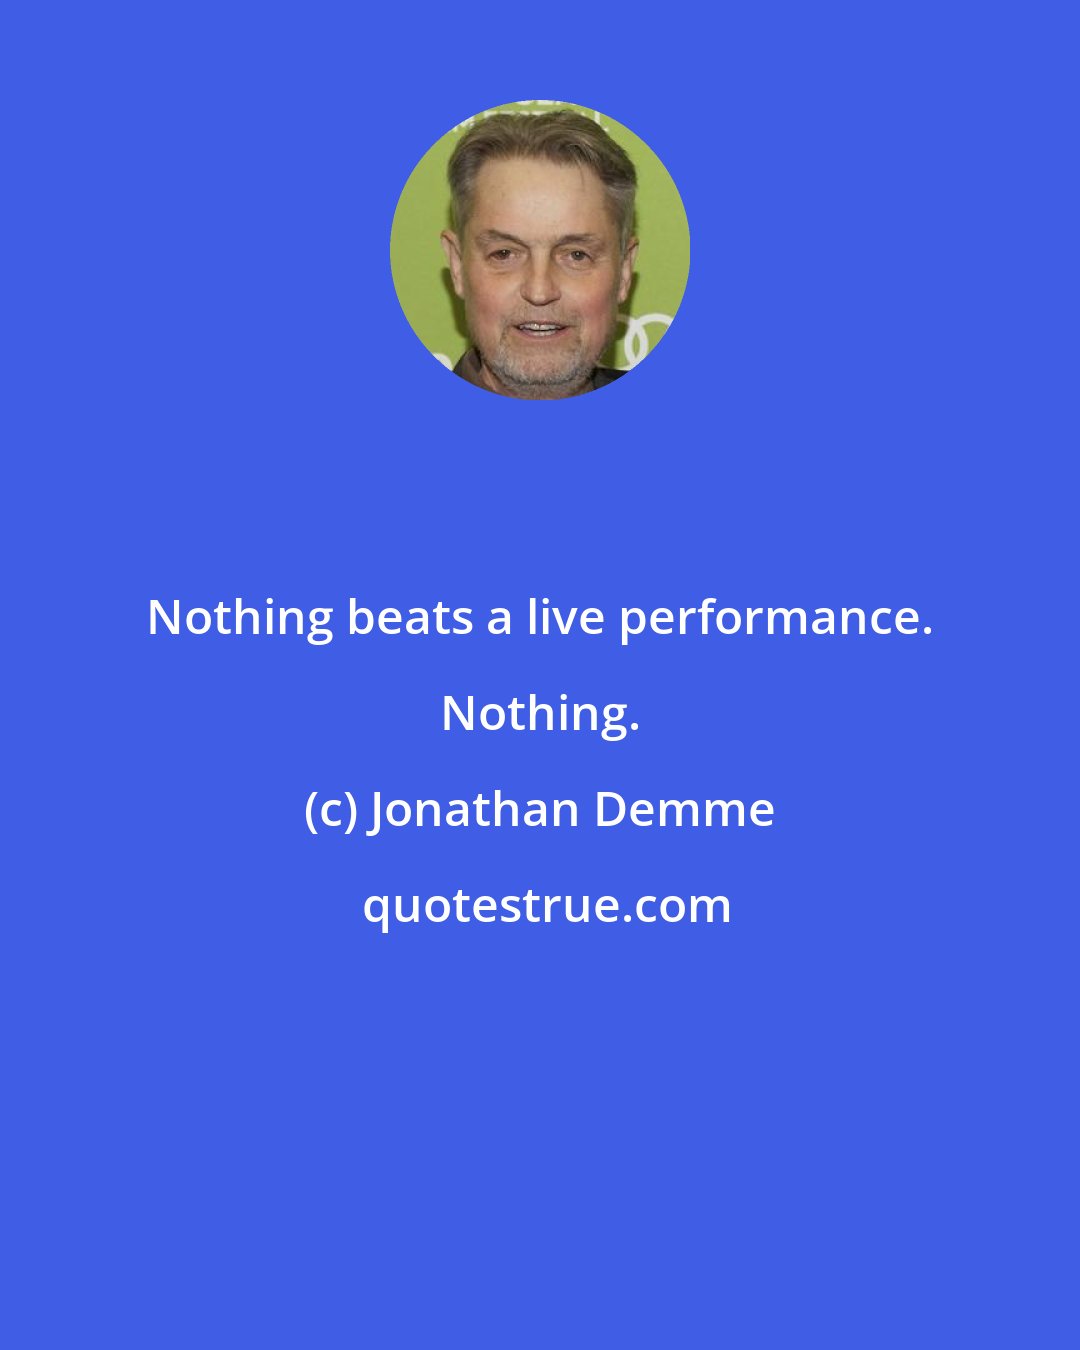 Jonathan Demme: Nothing beats a live performance. Nothing.